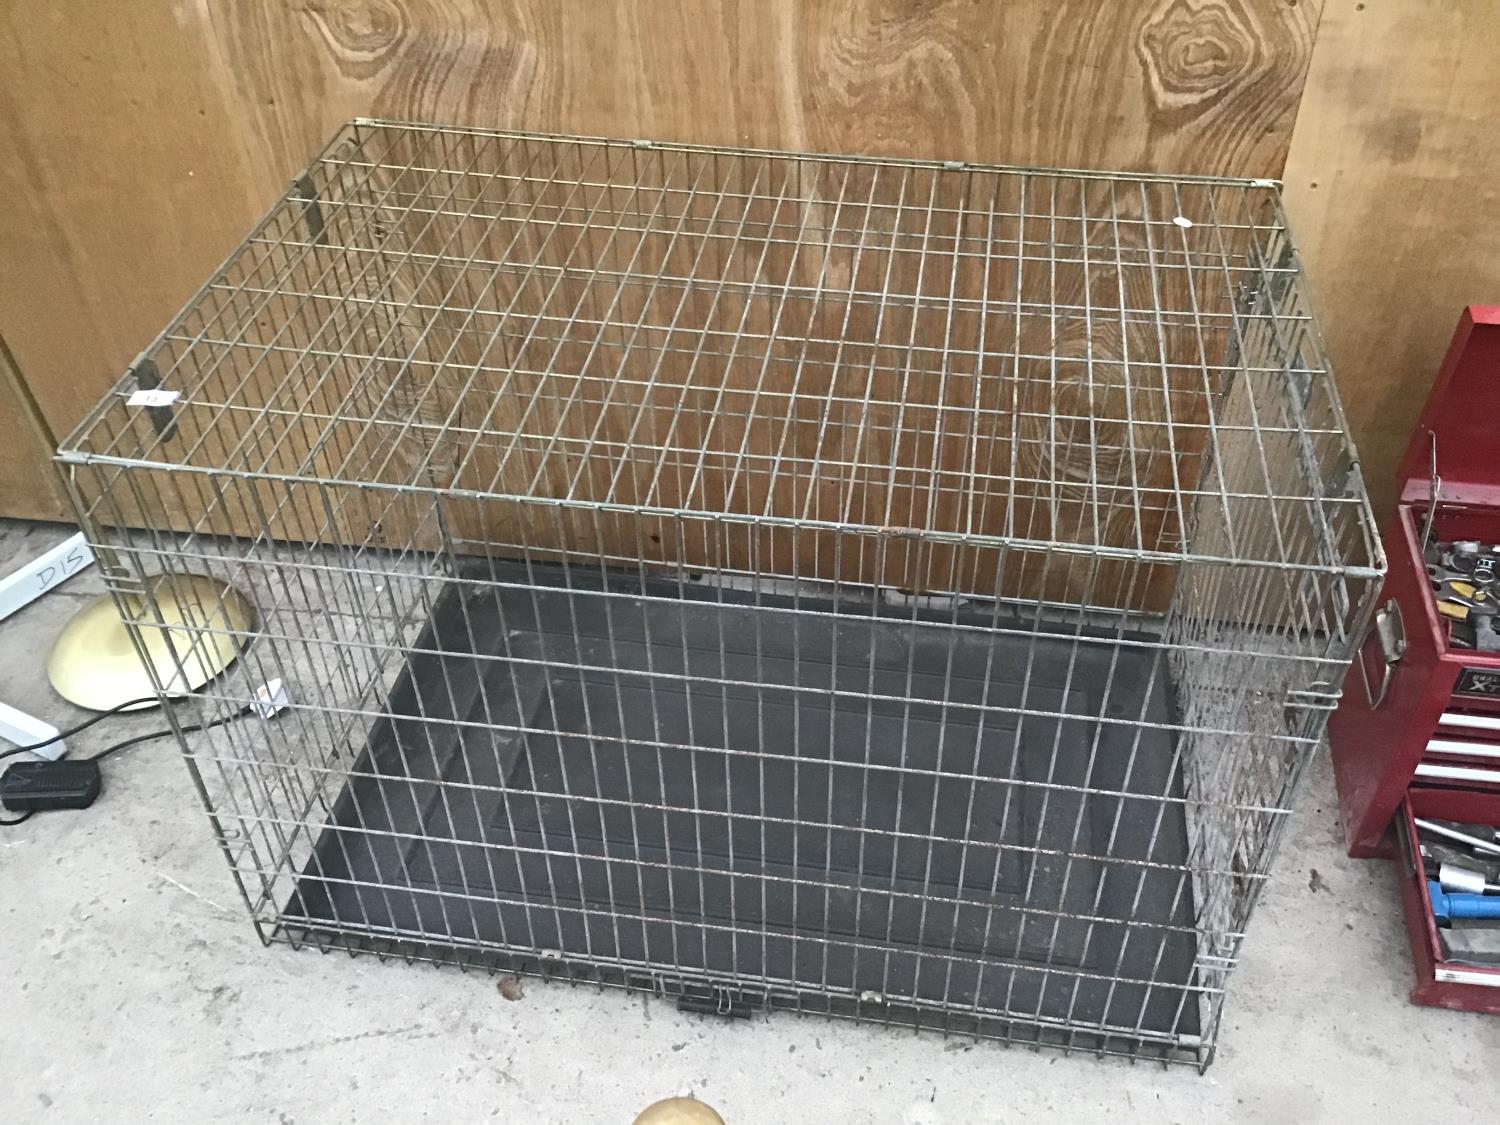 A LARGE DOG CRATE 27 IN X 41 IN X 25.5 IN - Image 2 of 4